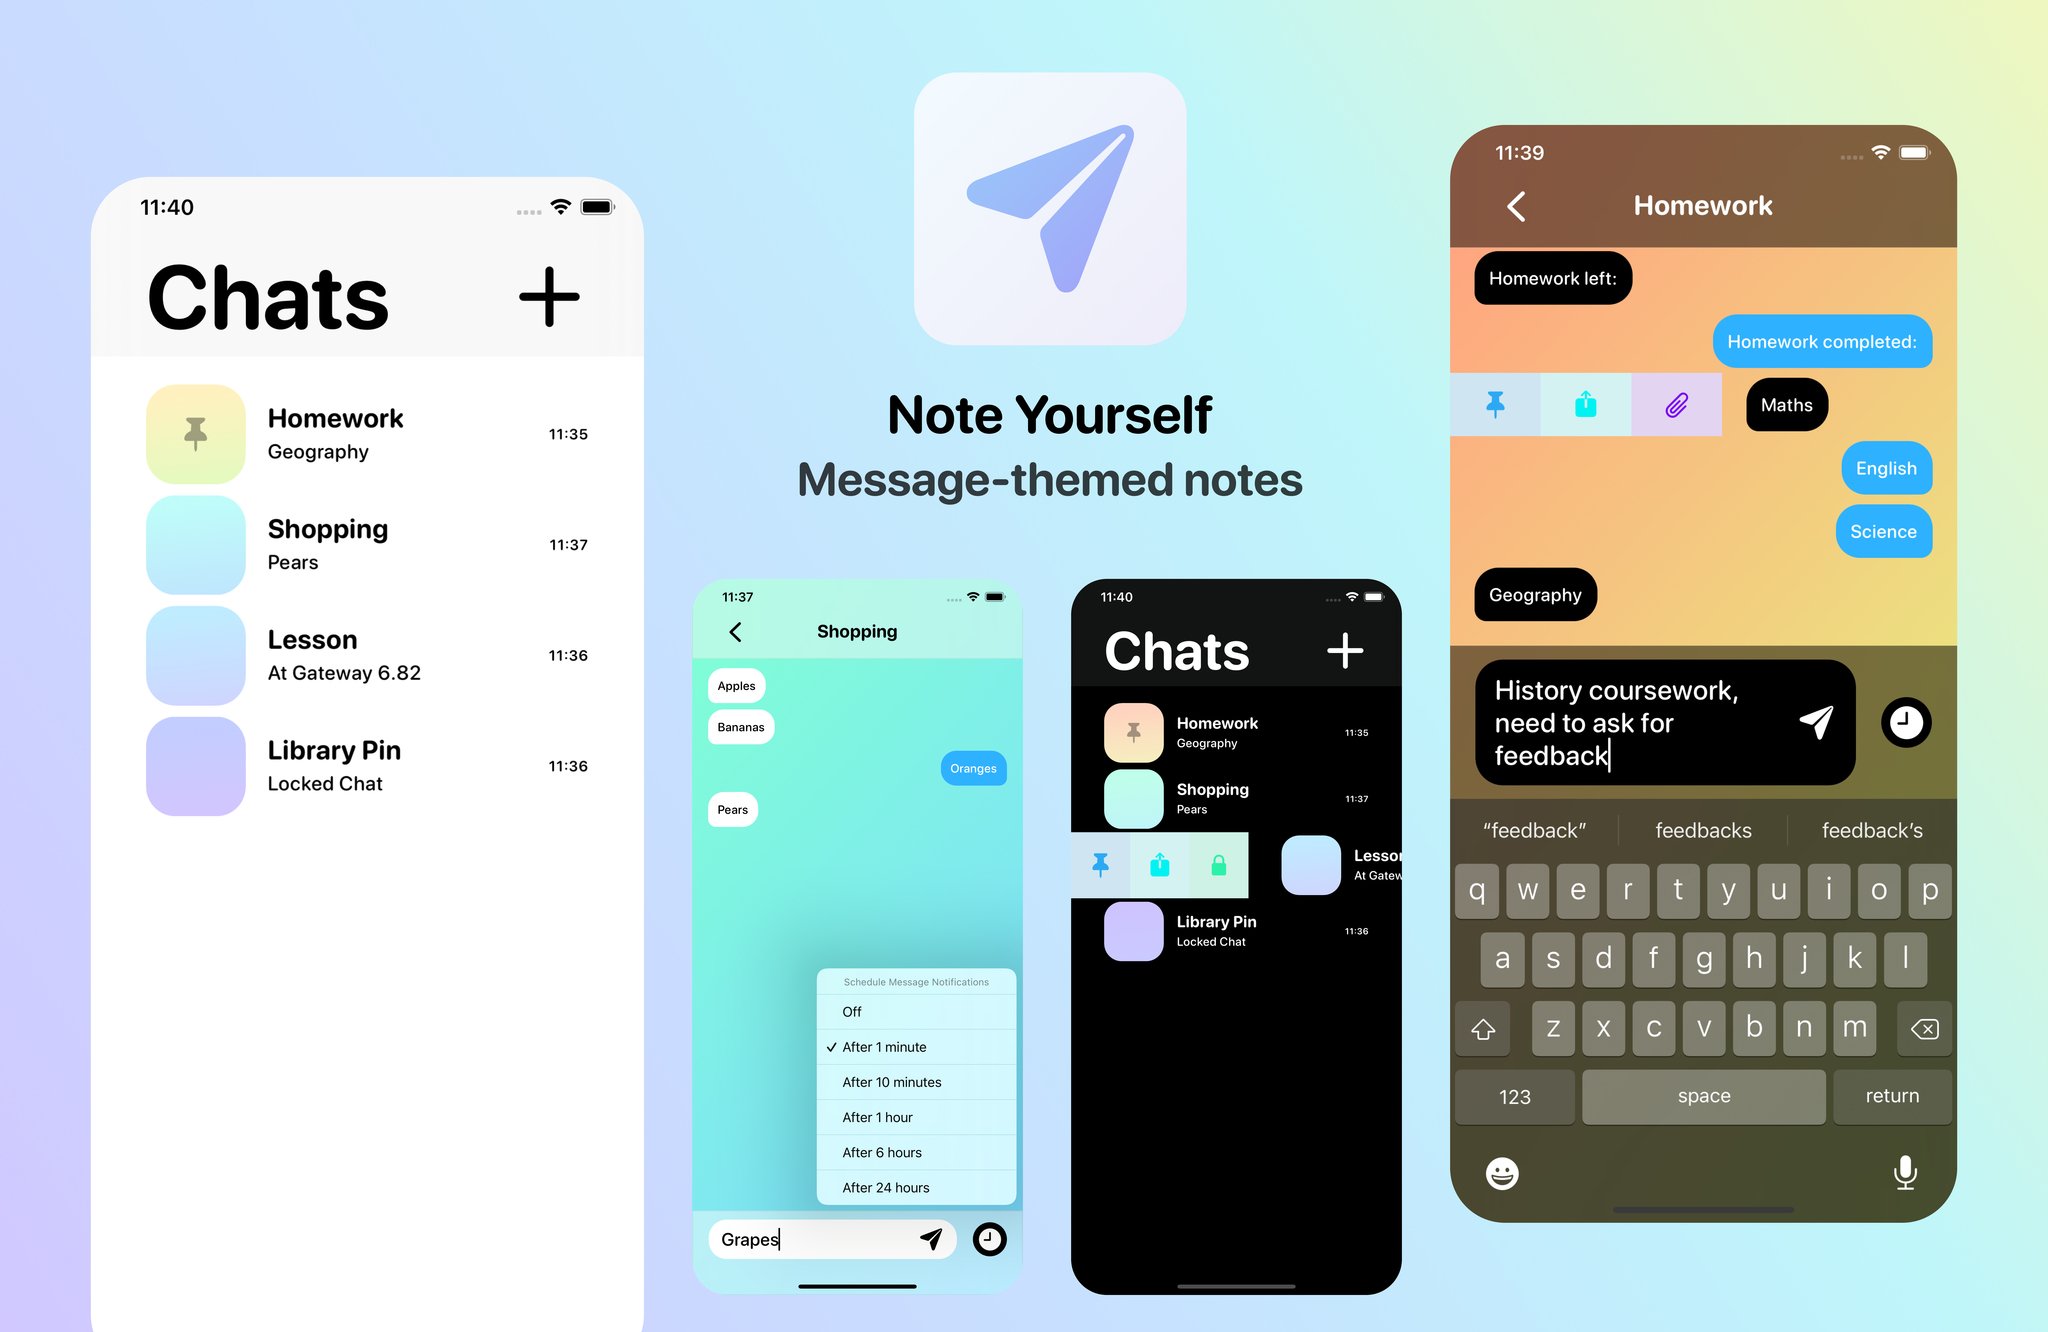 new-ios-note-taking-app-qept-aims-to-simplify-texting-yourself